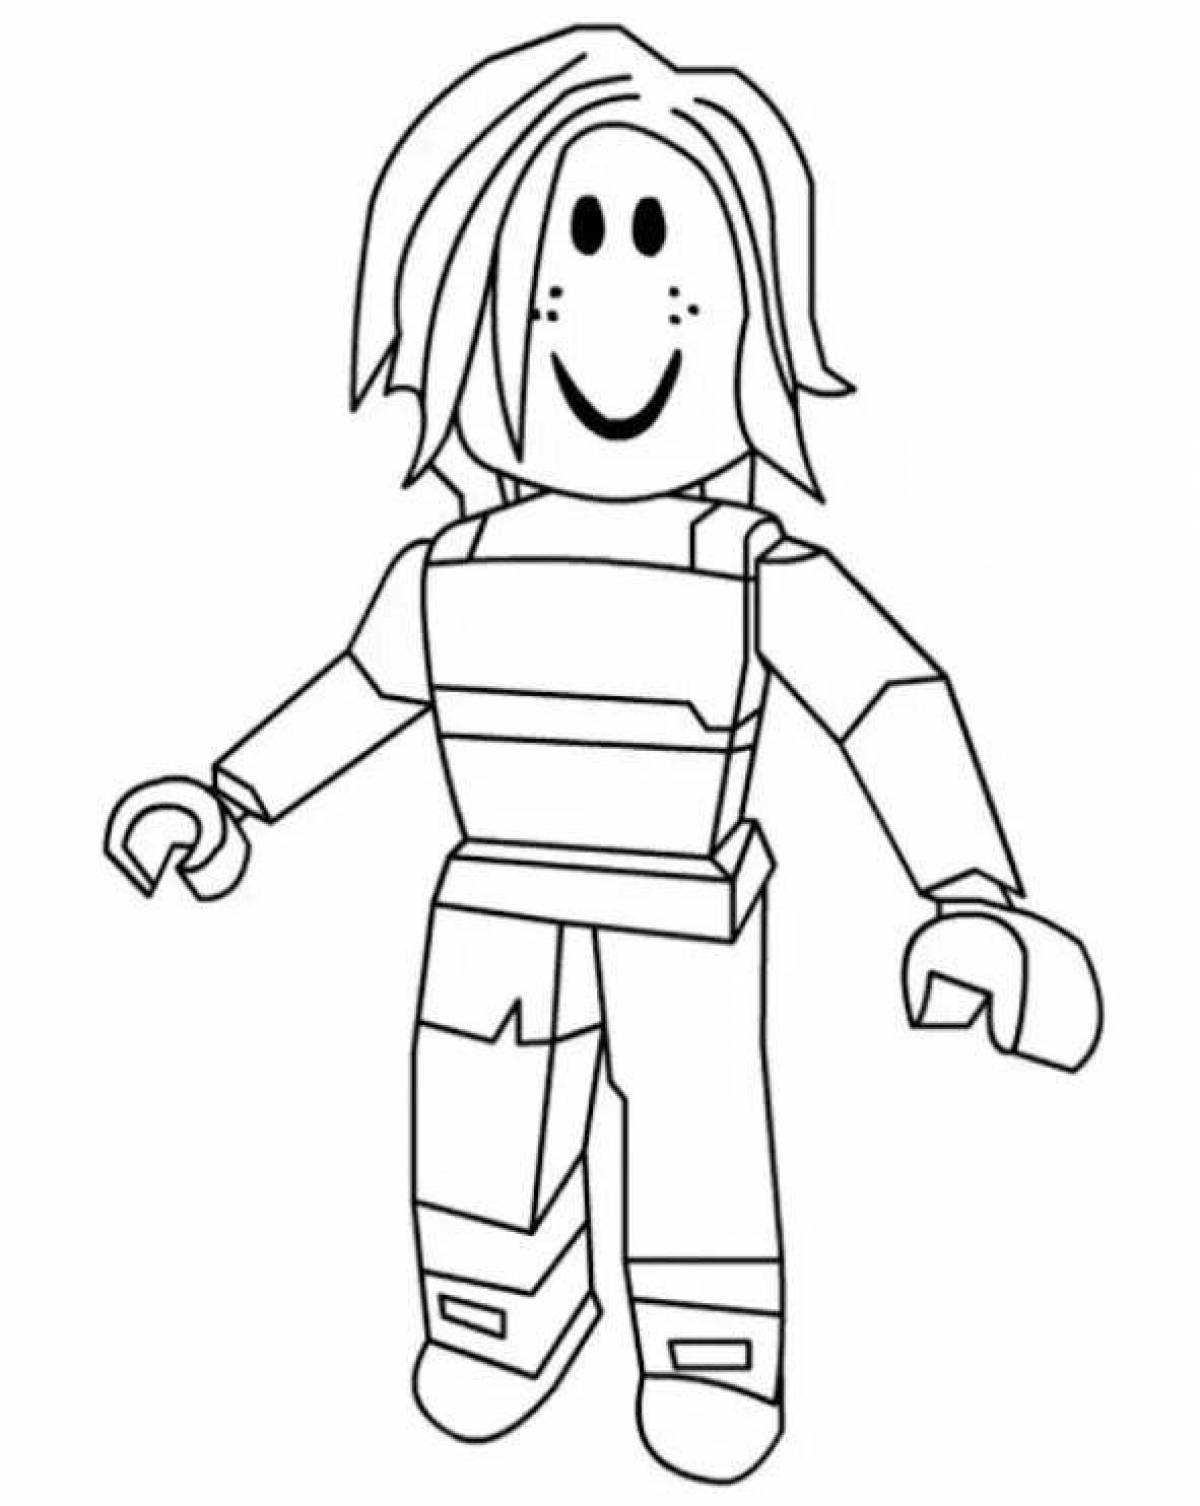 Color glowing roblox face coloring page